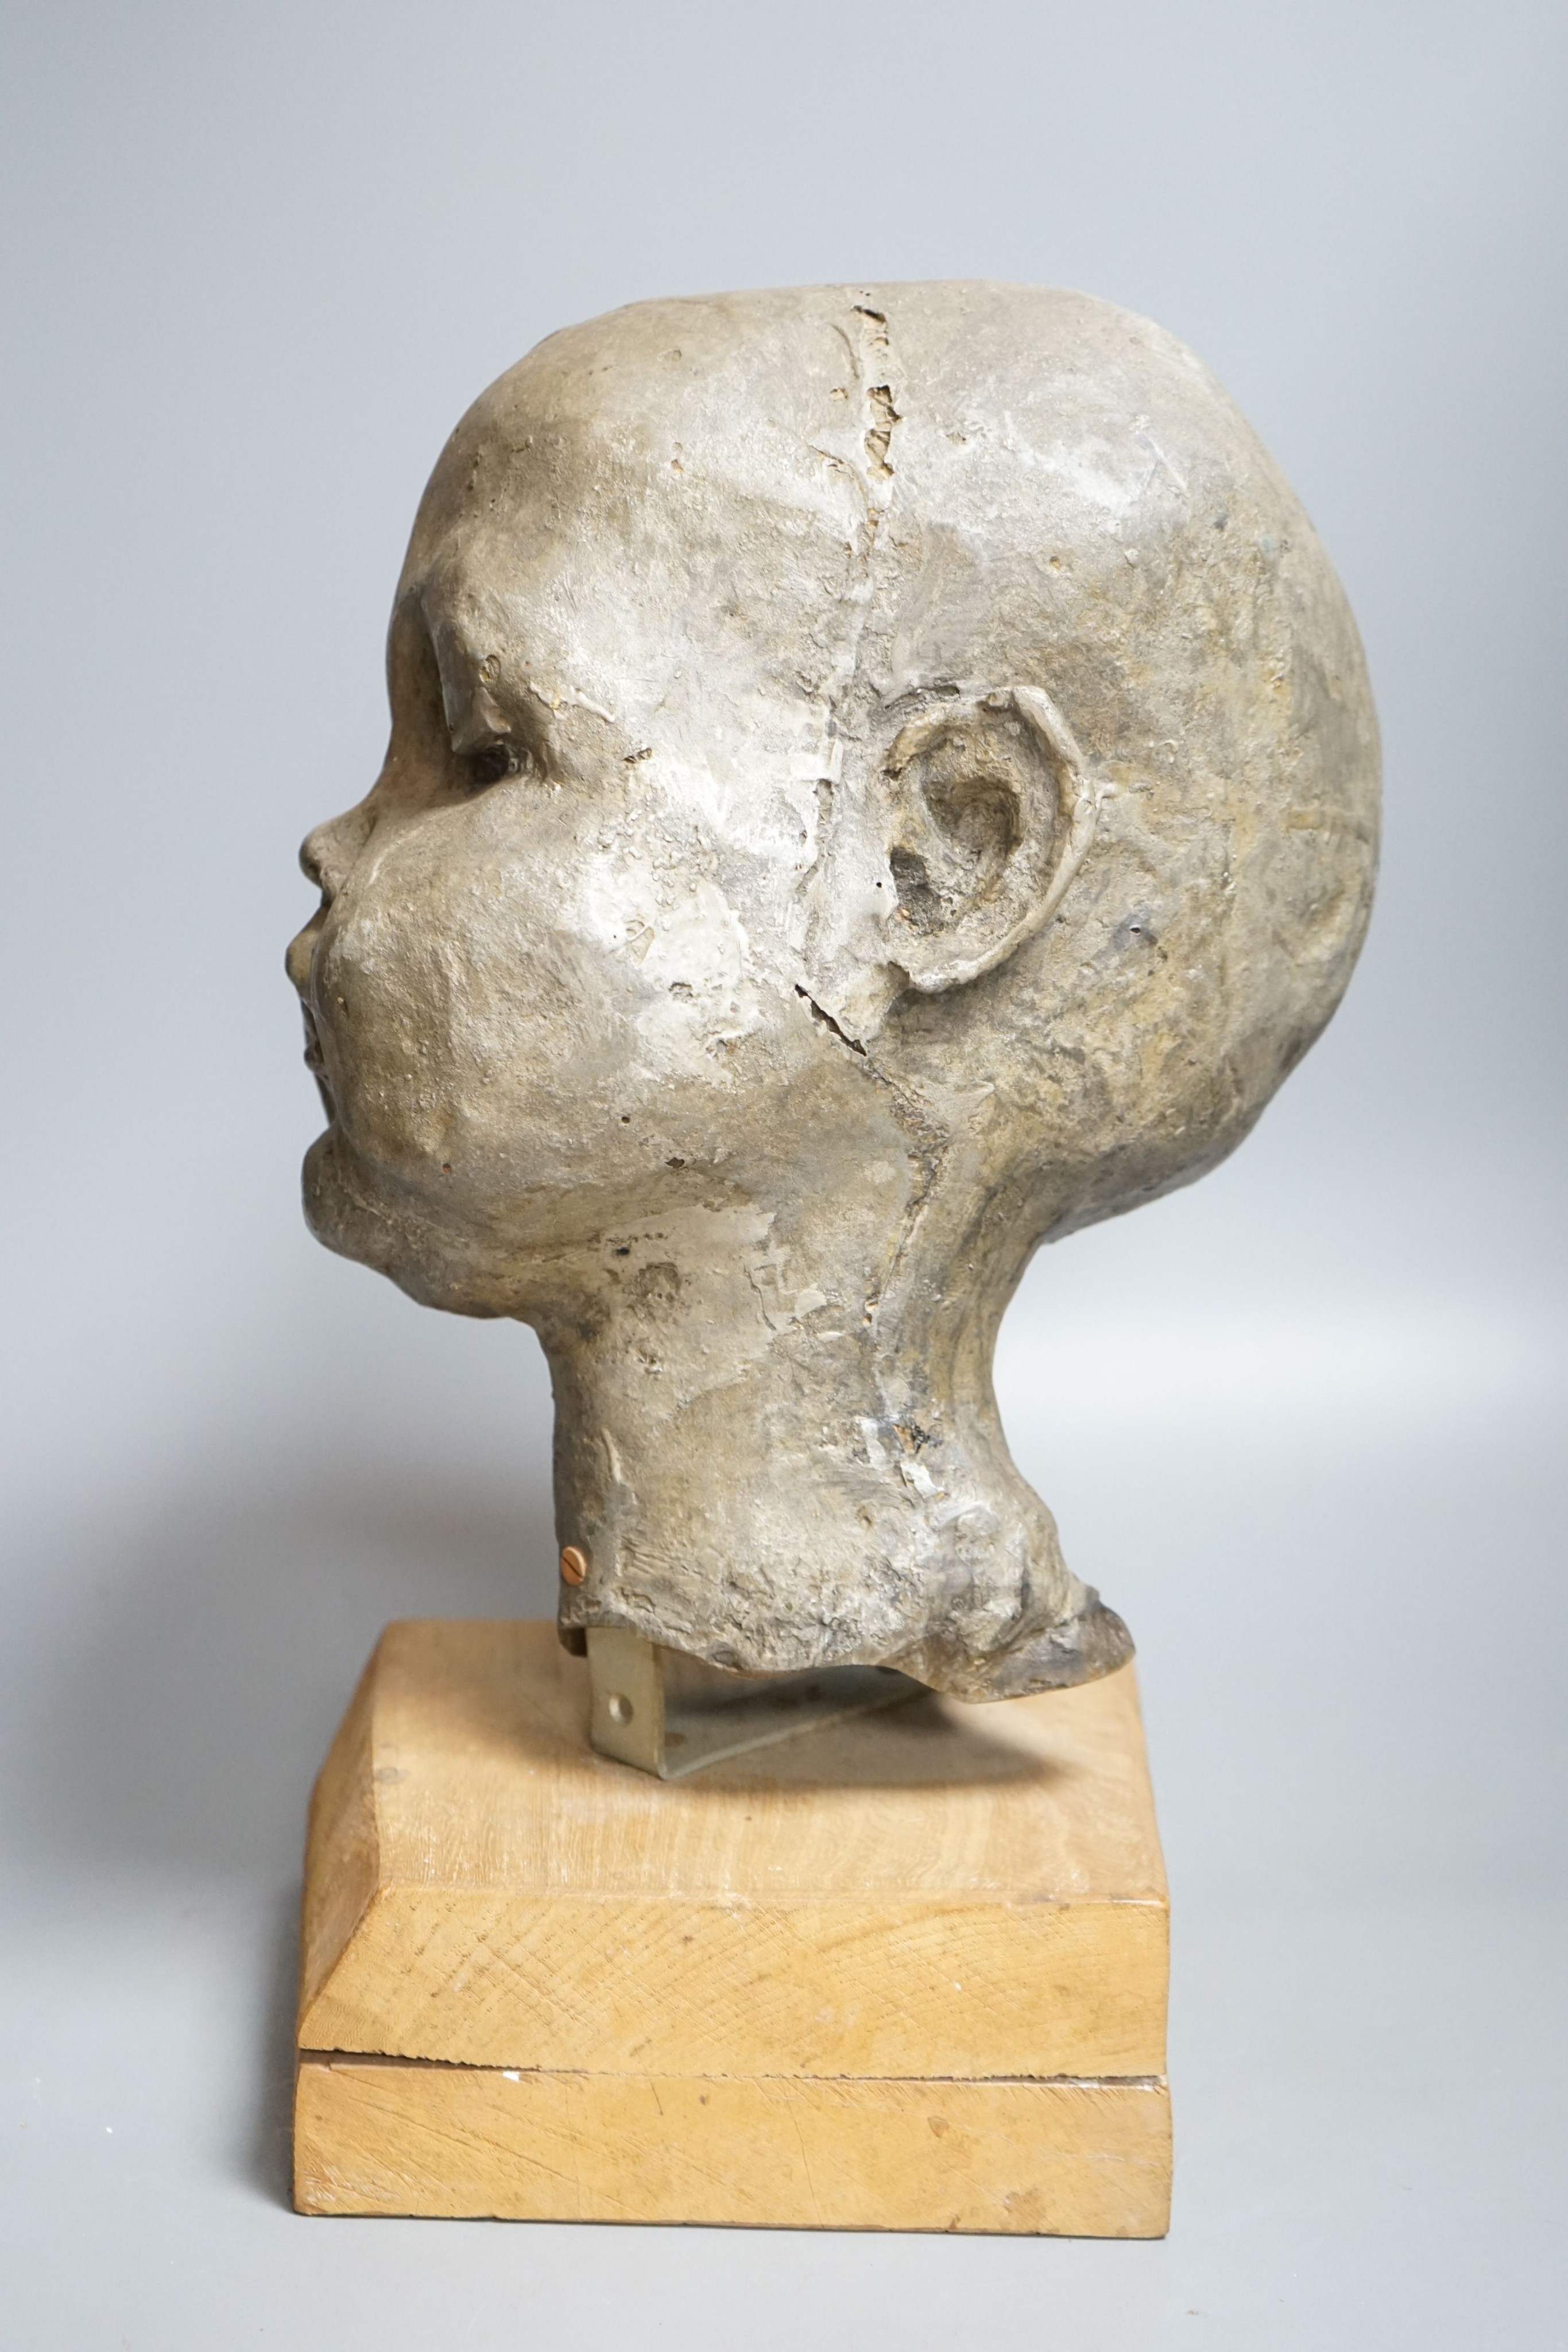 A composition sculpture of a child’s head40 cm high including plinth - Image 2 of 2